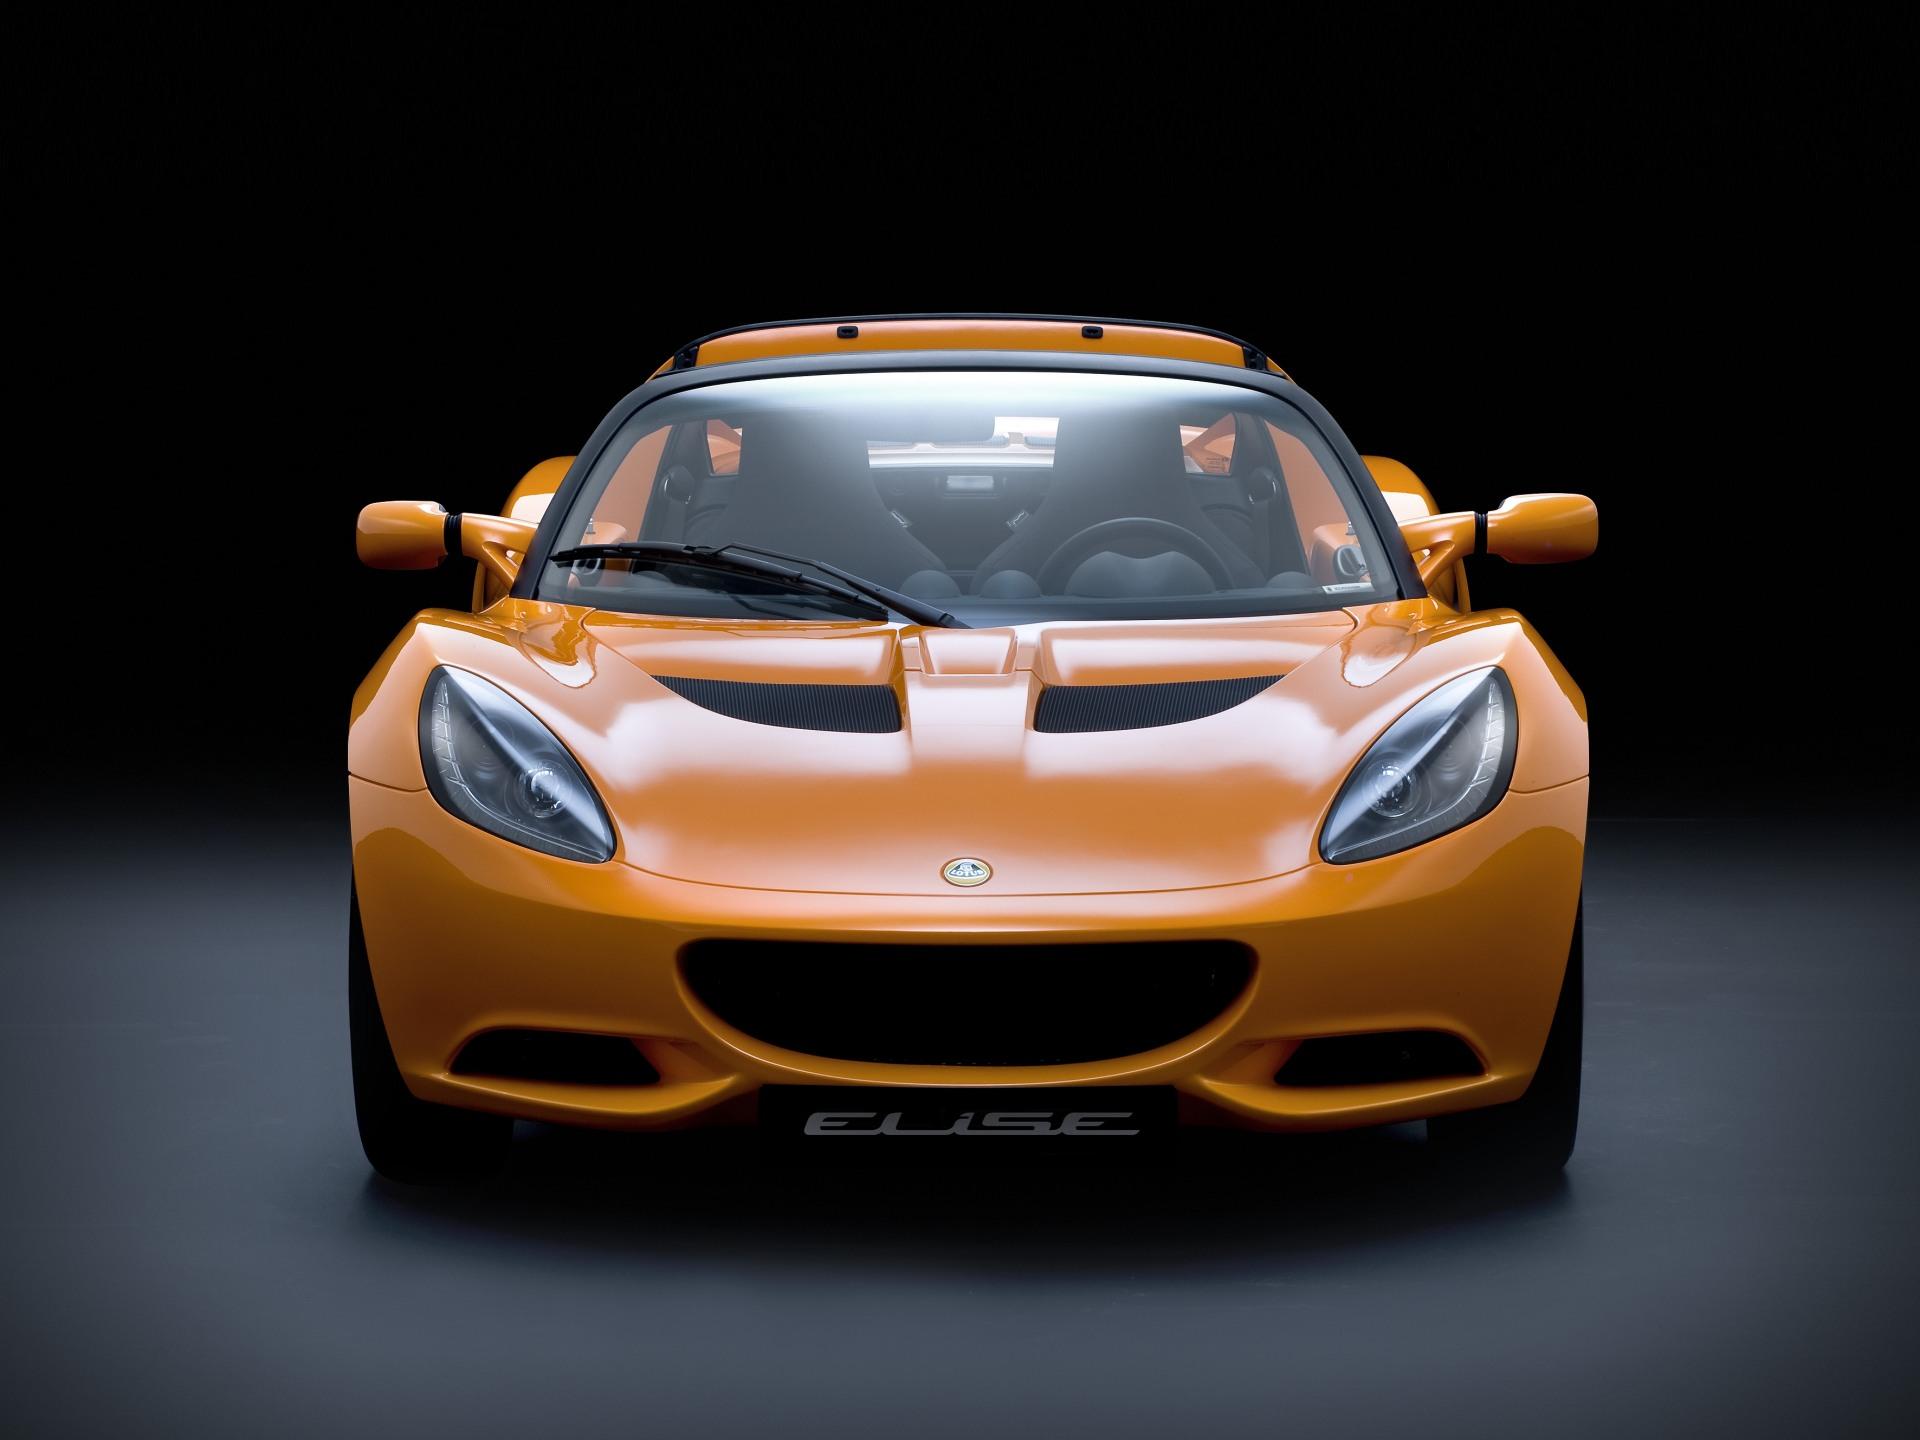 2011 Lotus Elise Wallpaper and Image Gallery